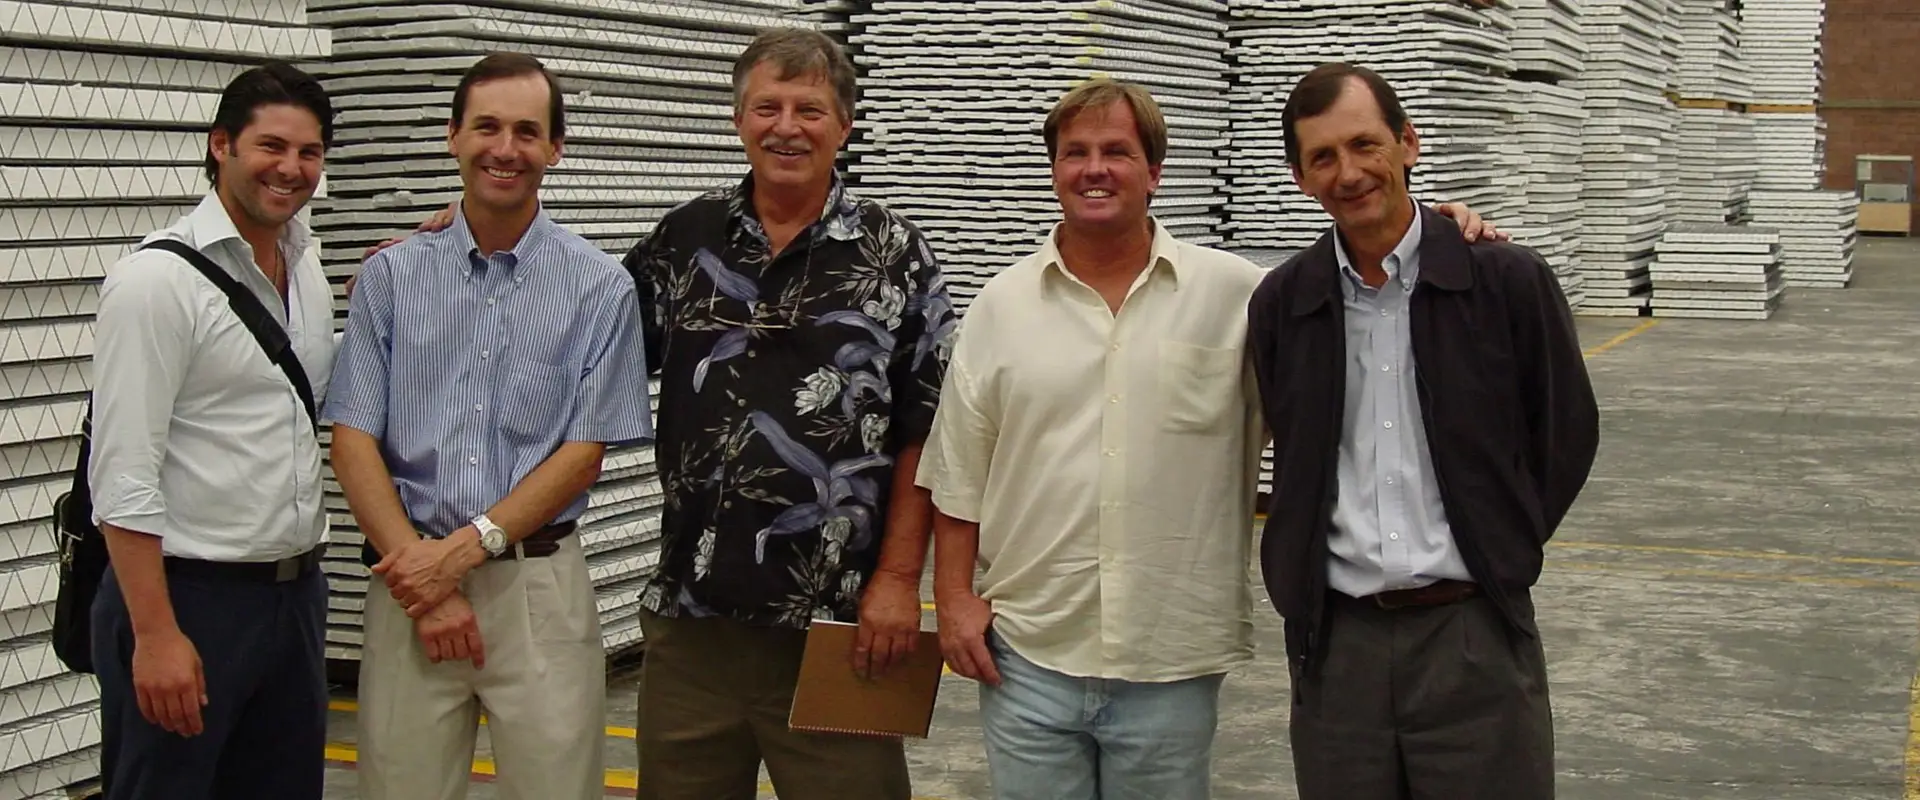 Five men smiling in front of stacked boards.